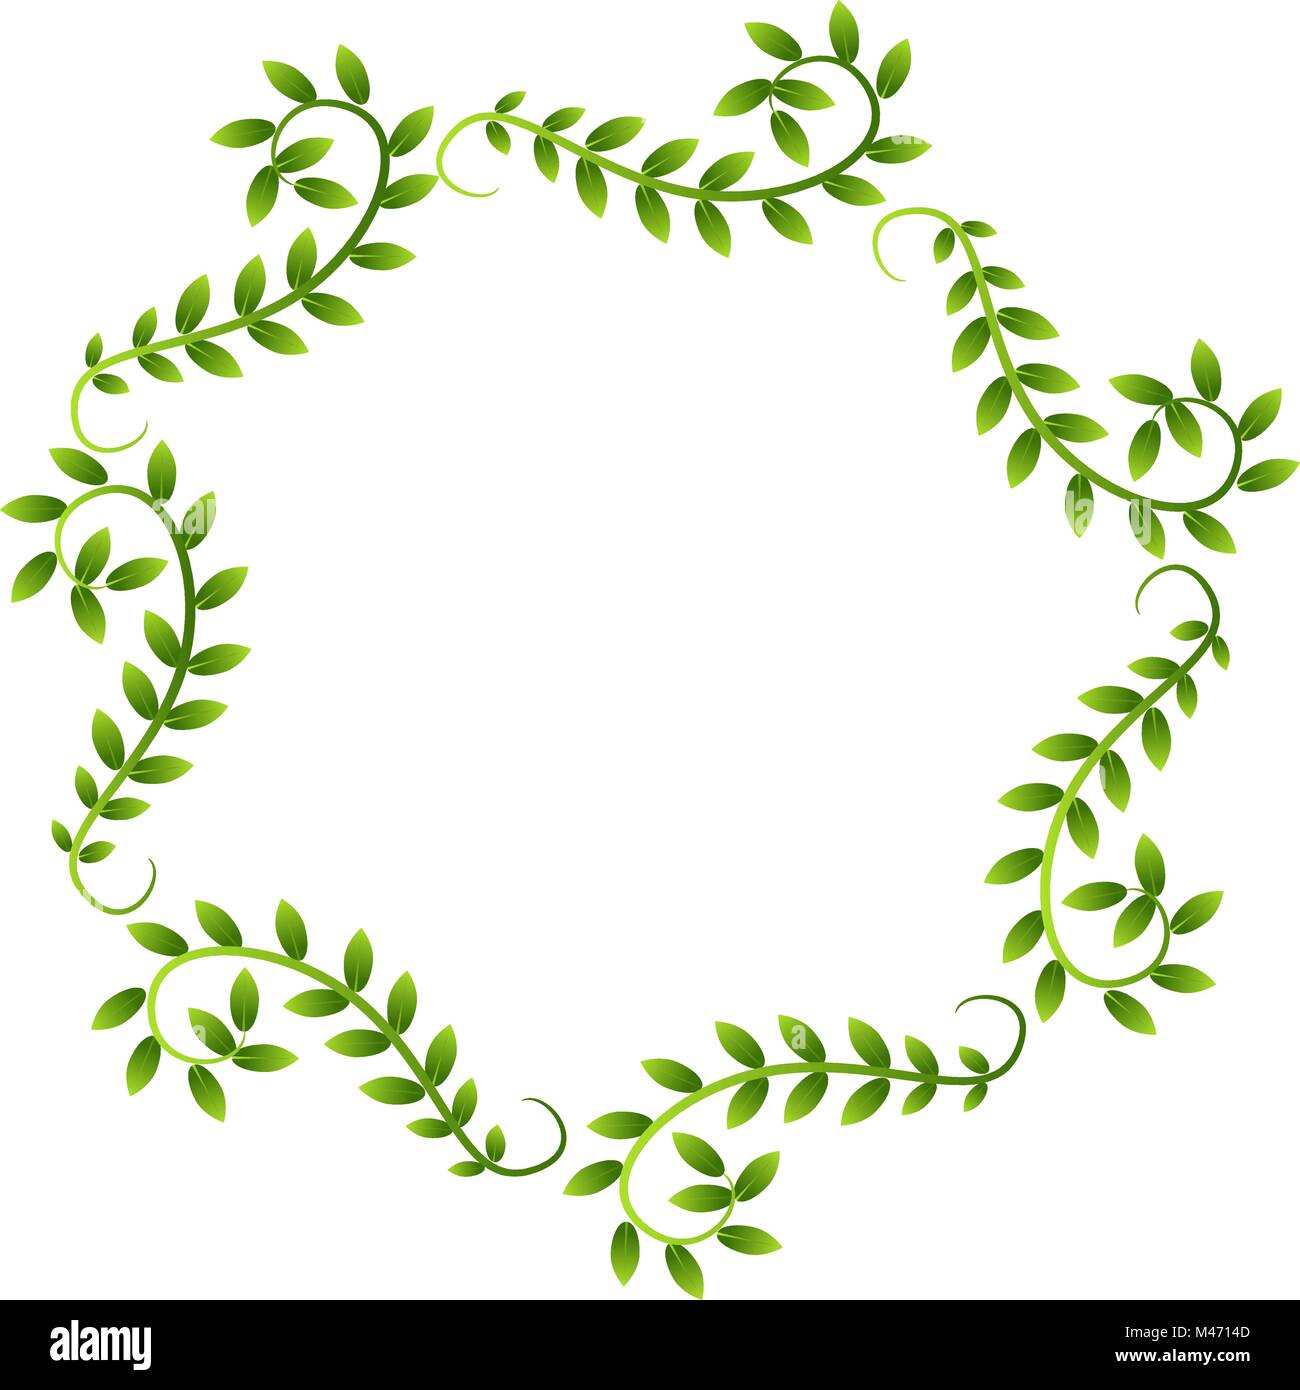 An image of a Plant Vine Leaves Frame Wreath Border isolated on white ...